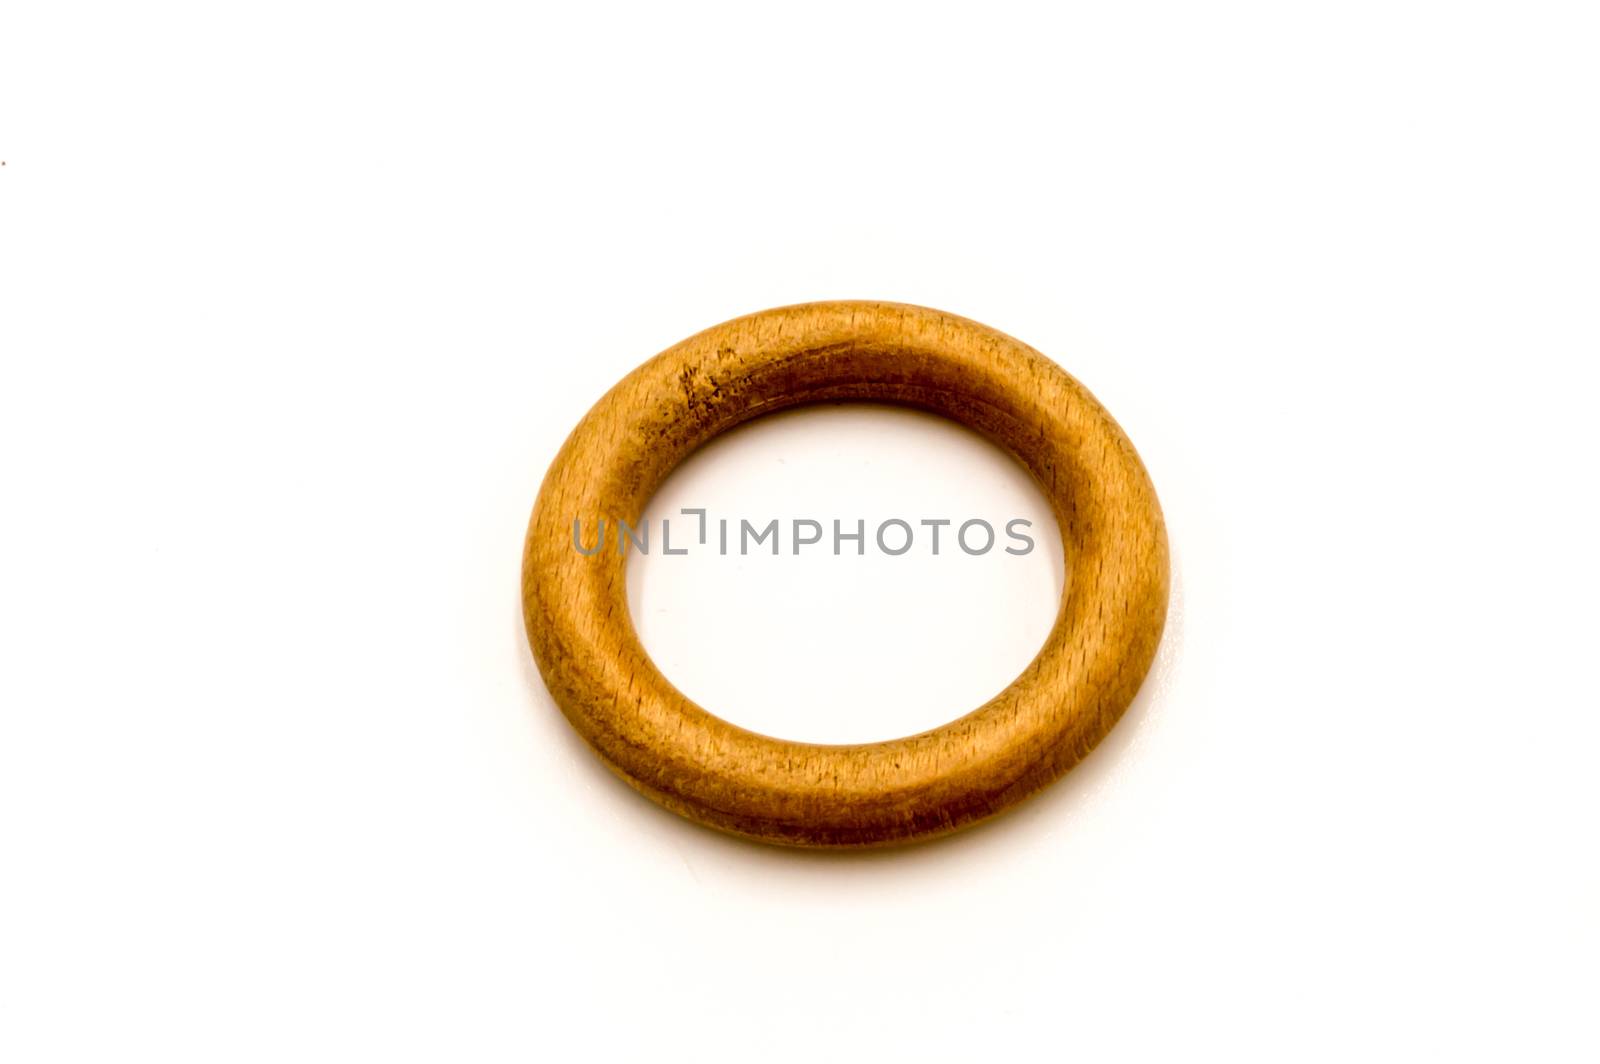 light colored wooden ring on a white background